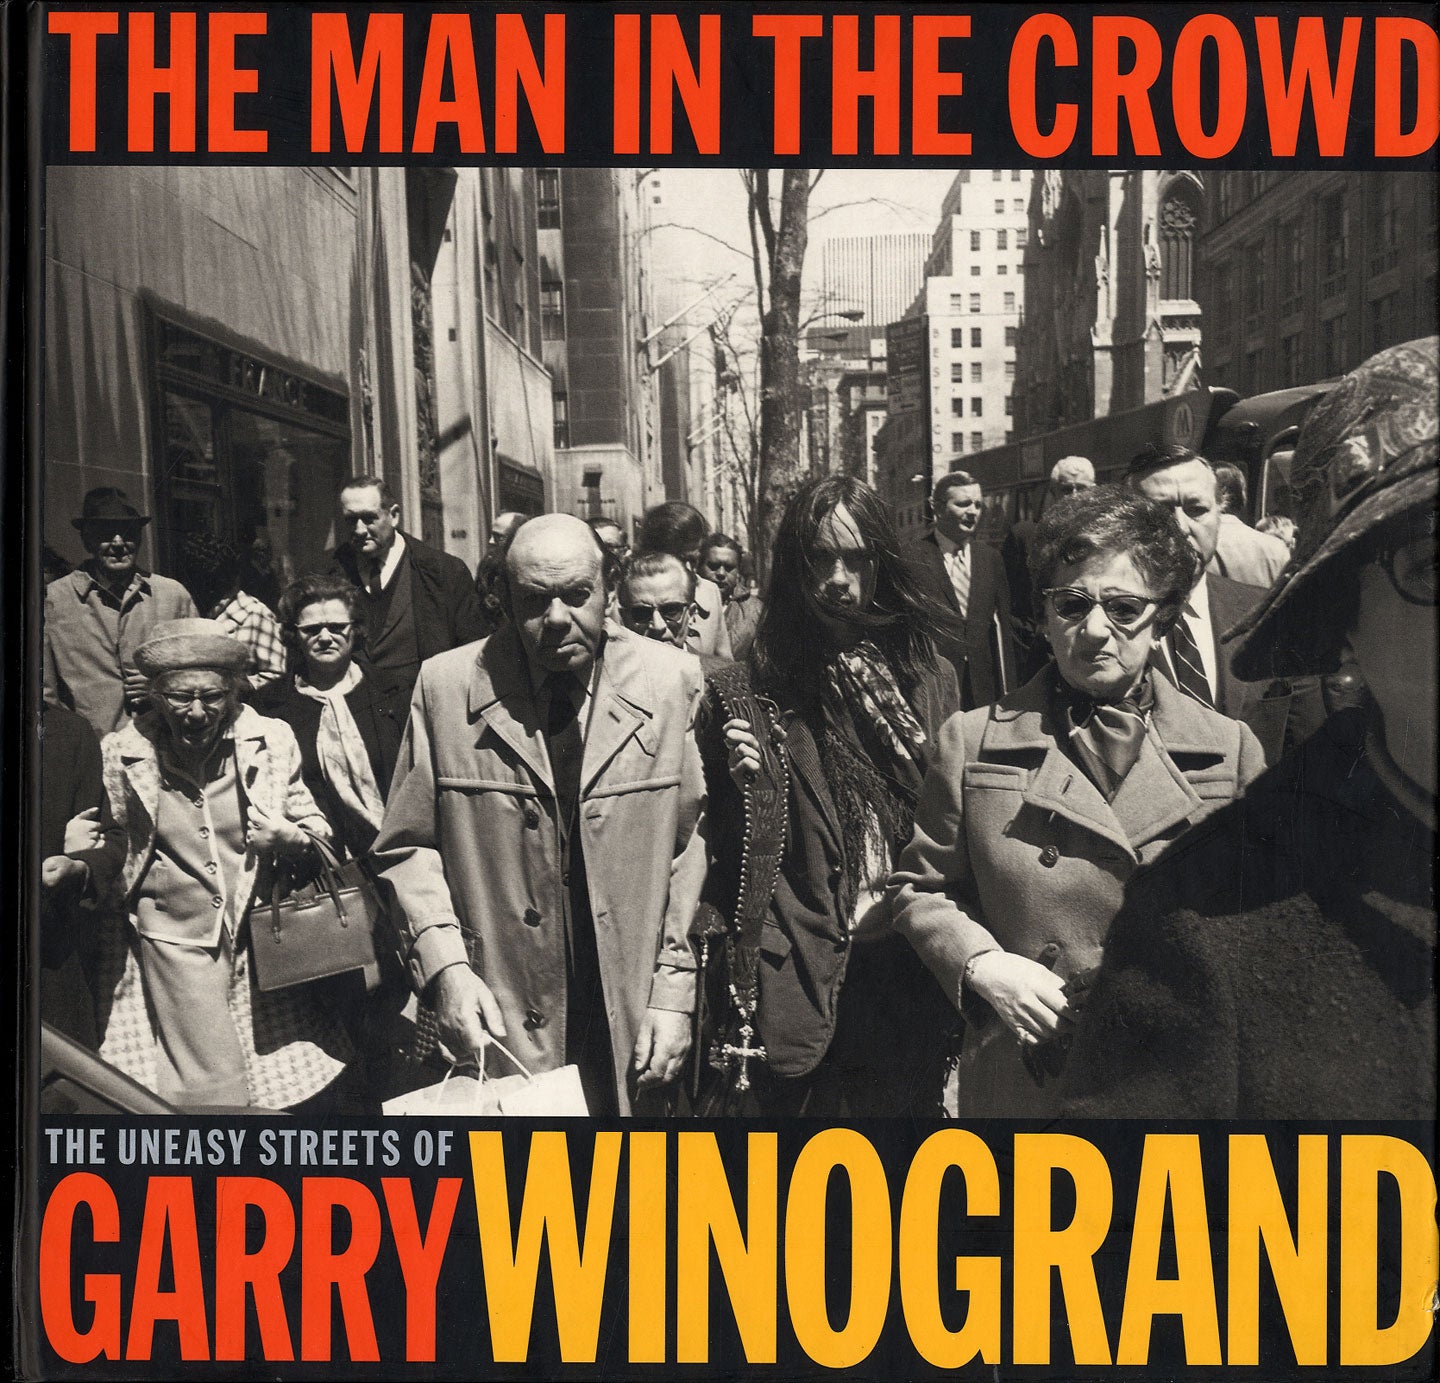 The Man in the Crowd: The Uneasy Streets of Garry Winogrand